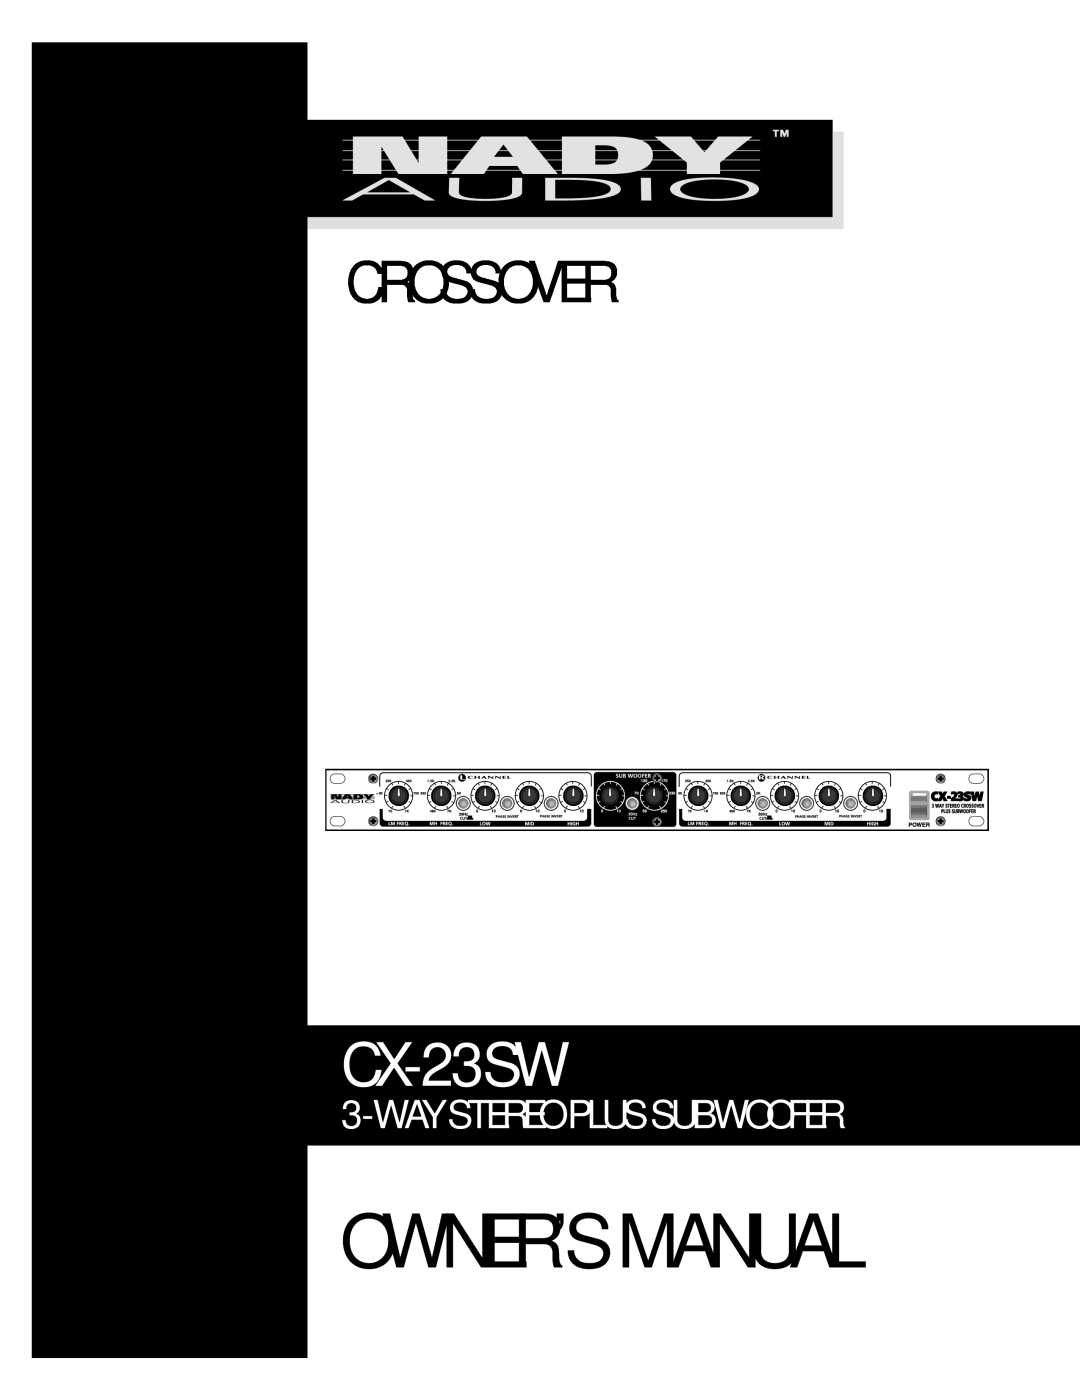 Nady Systems CX-23SW owner manual Crossover, Waystereo Plus Subwoofer 